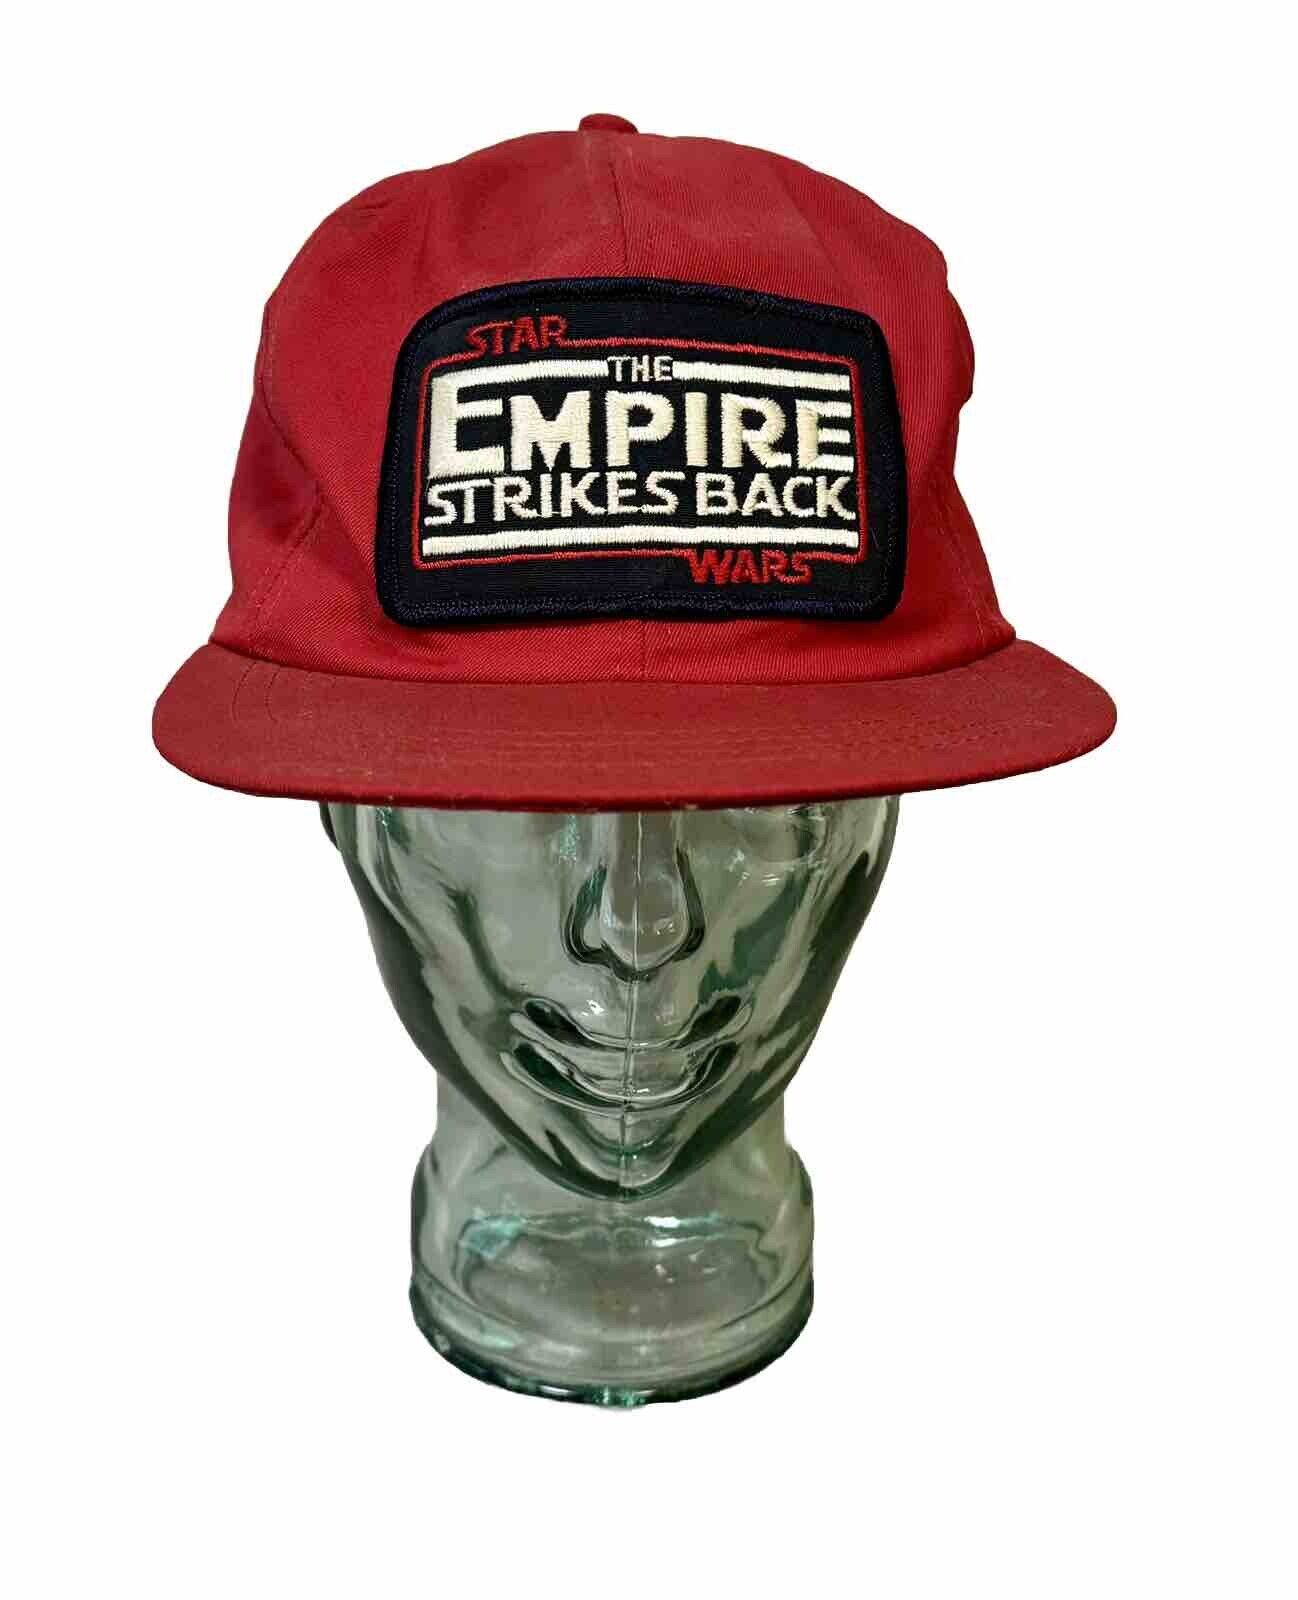 1980s Vintage Star Wars The Empire Strikes Back Thinking Cap Red SnapBack